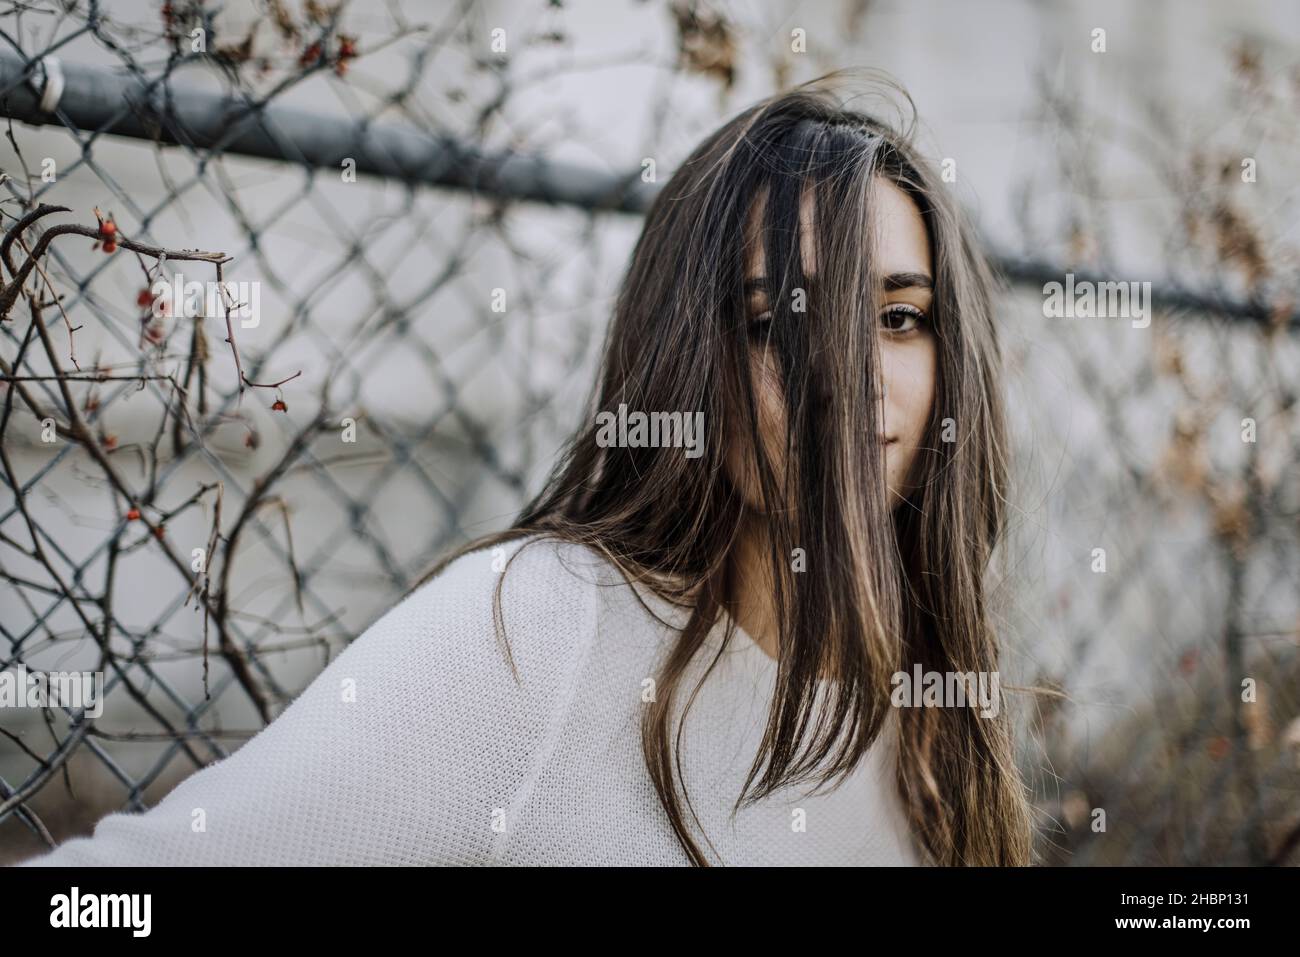 portrait of teenage girl with hair in face against chain link fence Stock Photo